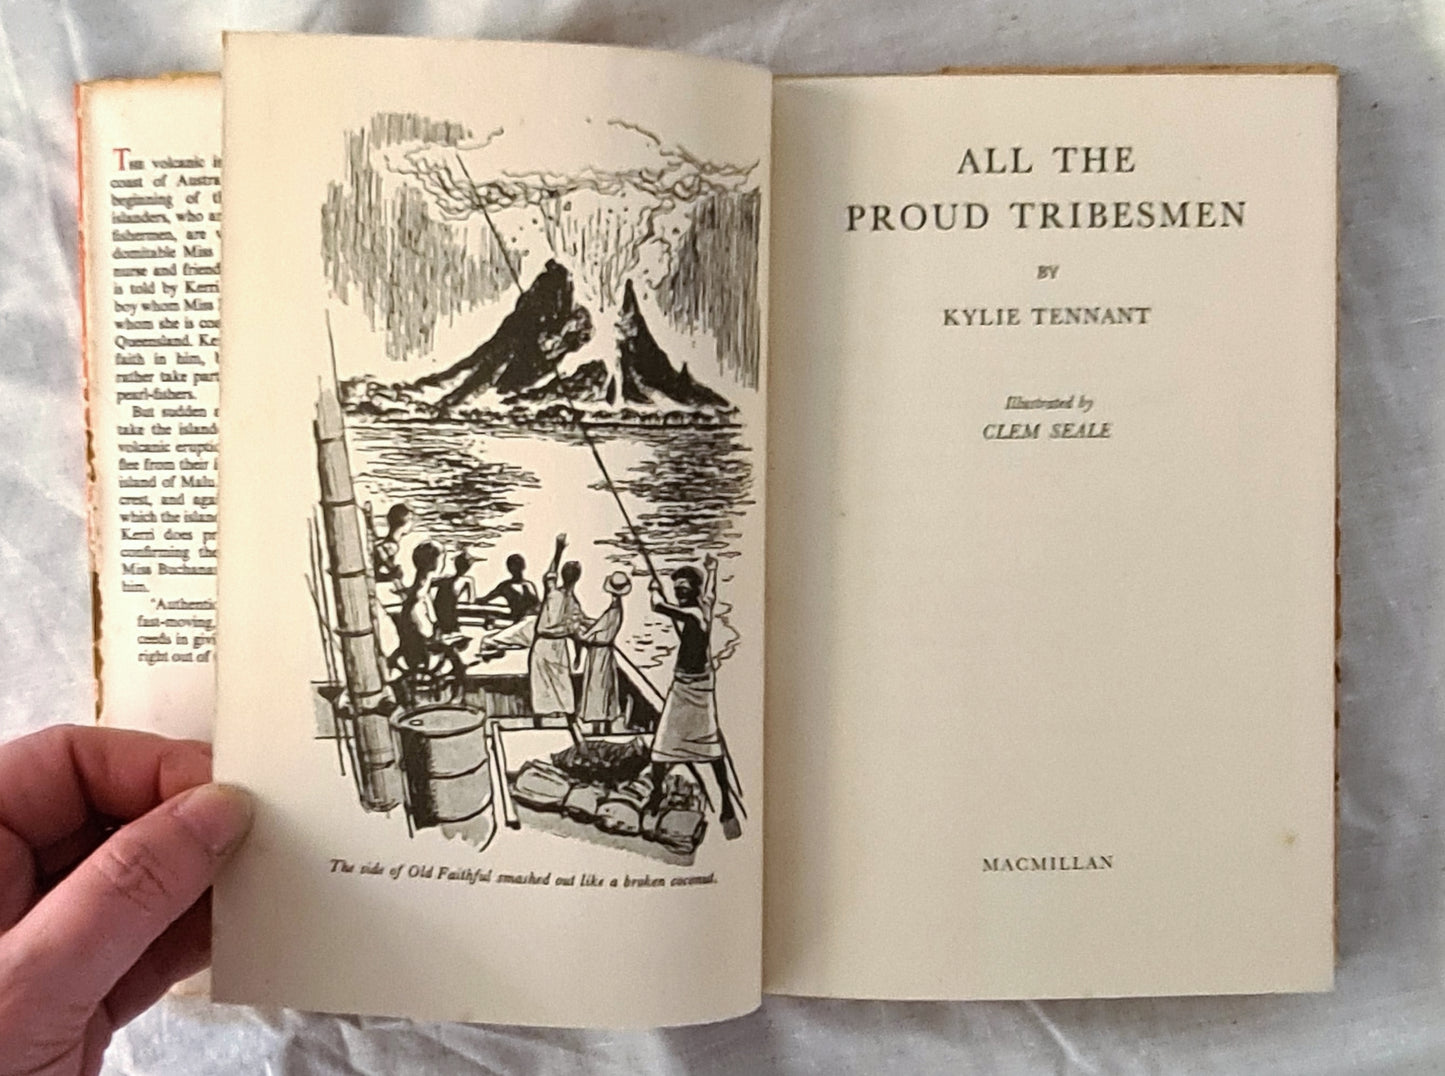 All The Proud Tribesmen by Kylie Tennant